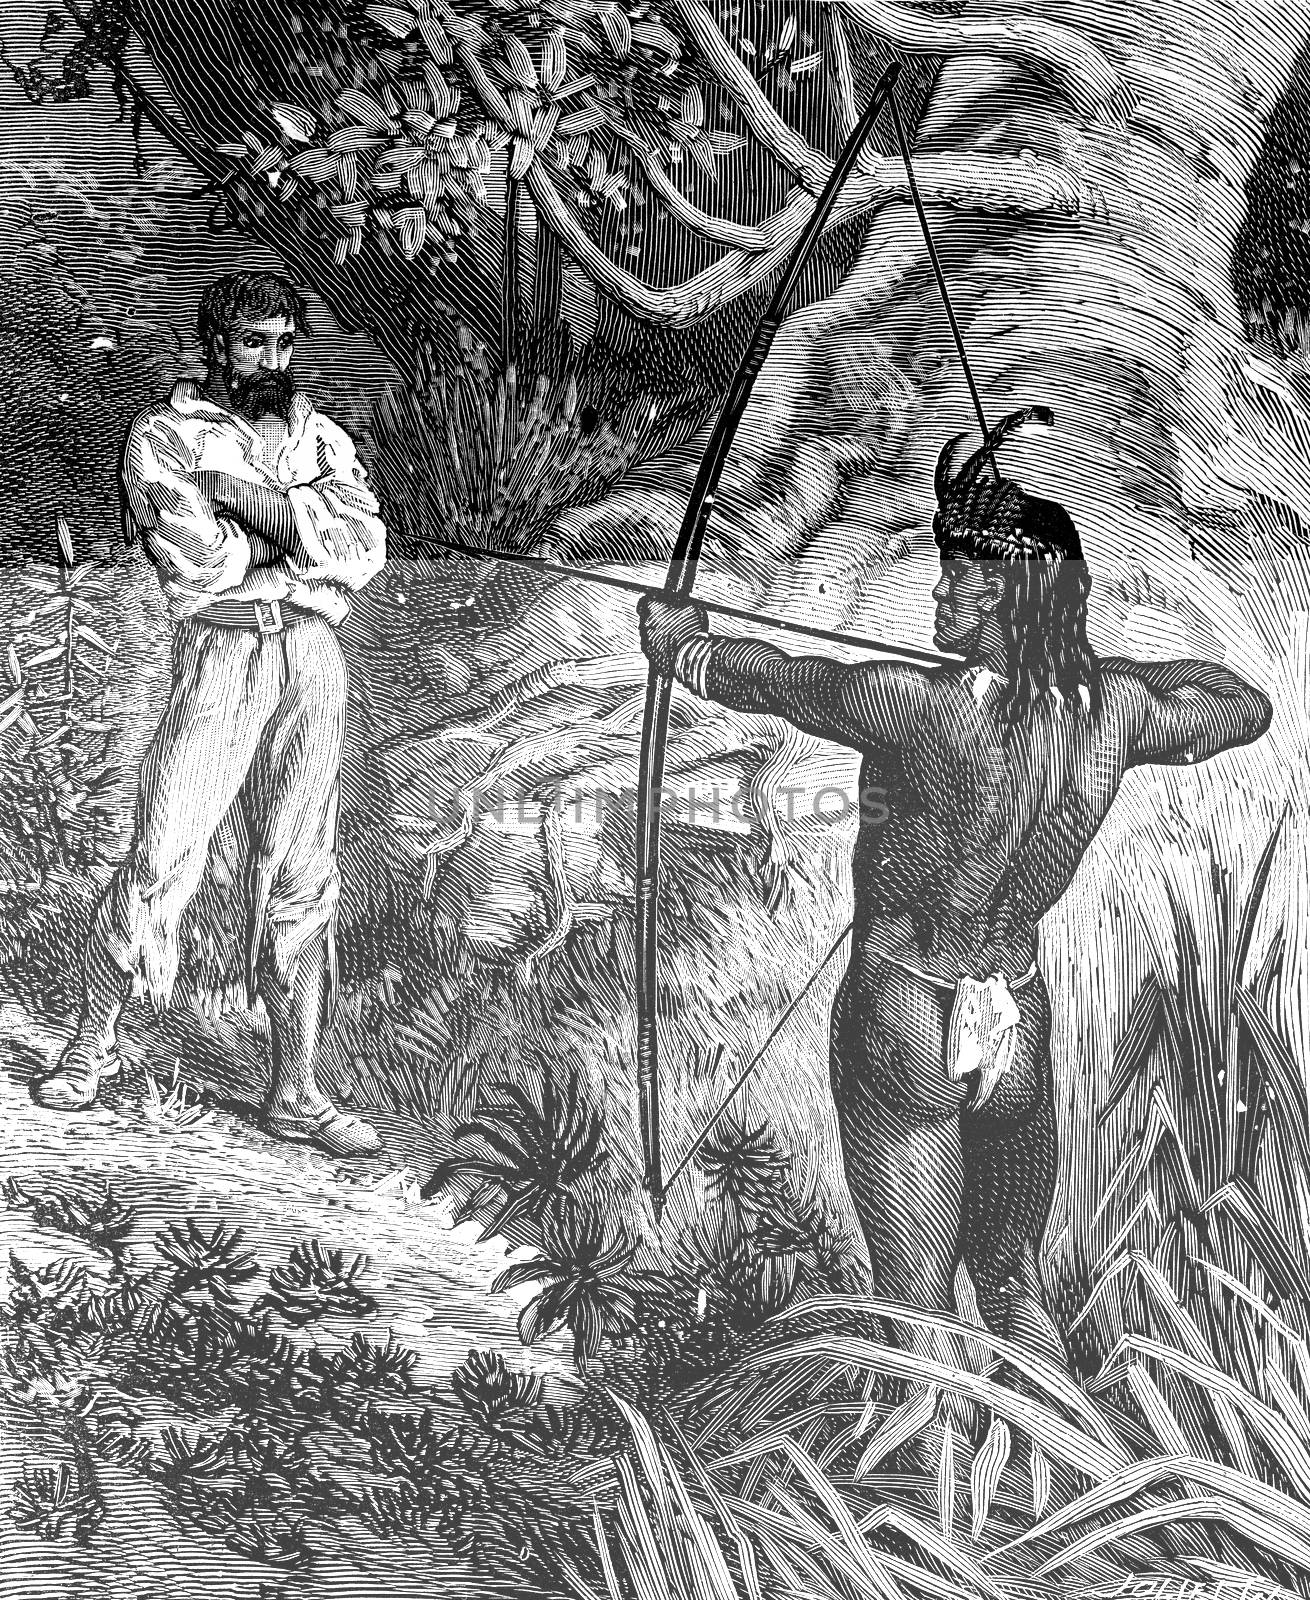 Robinson Crusoe the guyana. A red-skin appeared stretched his bow, vintage engraved illustration. Journal des Voyage, Travel Journal, (1880-81).